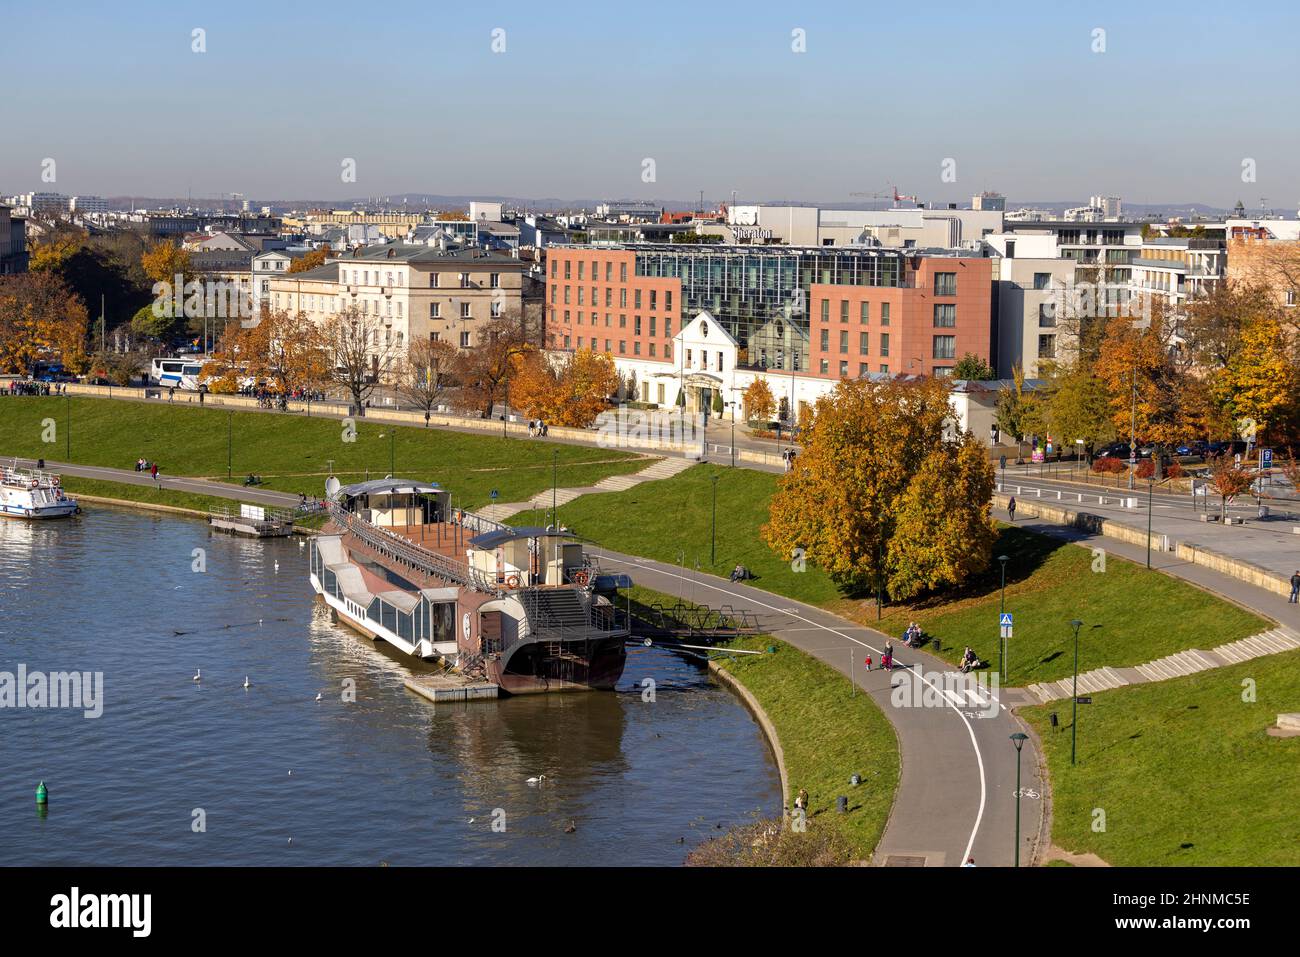 Boulevard on the river Wisla, recreational area, barge restaurant mooring at the shore, Krakow, Poland Stock Photo